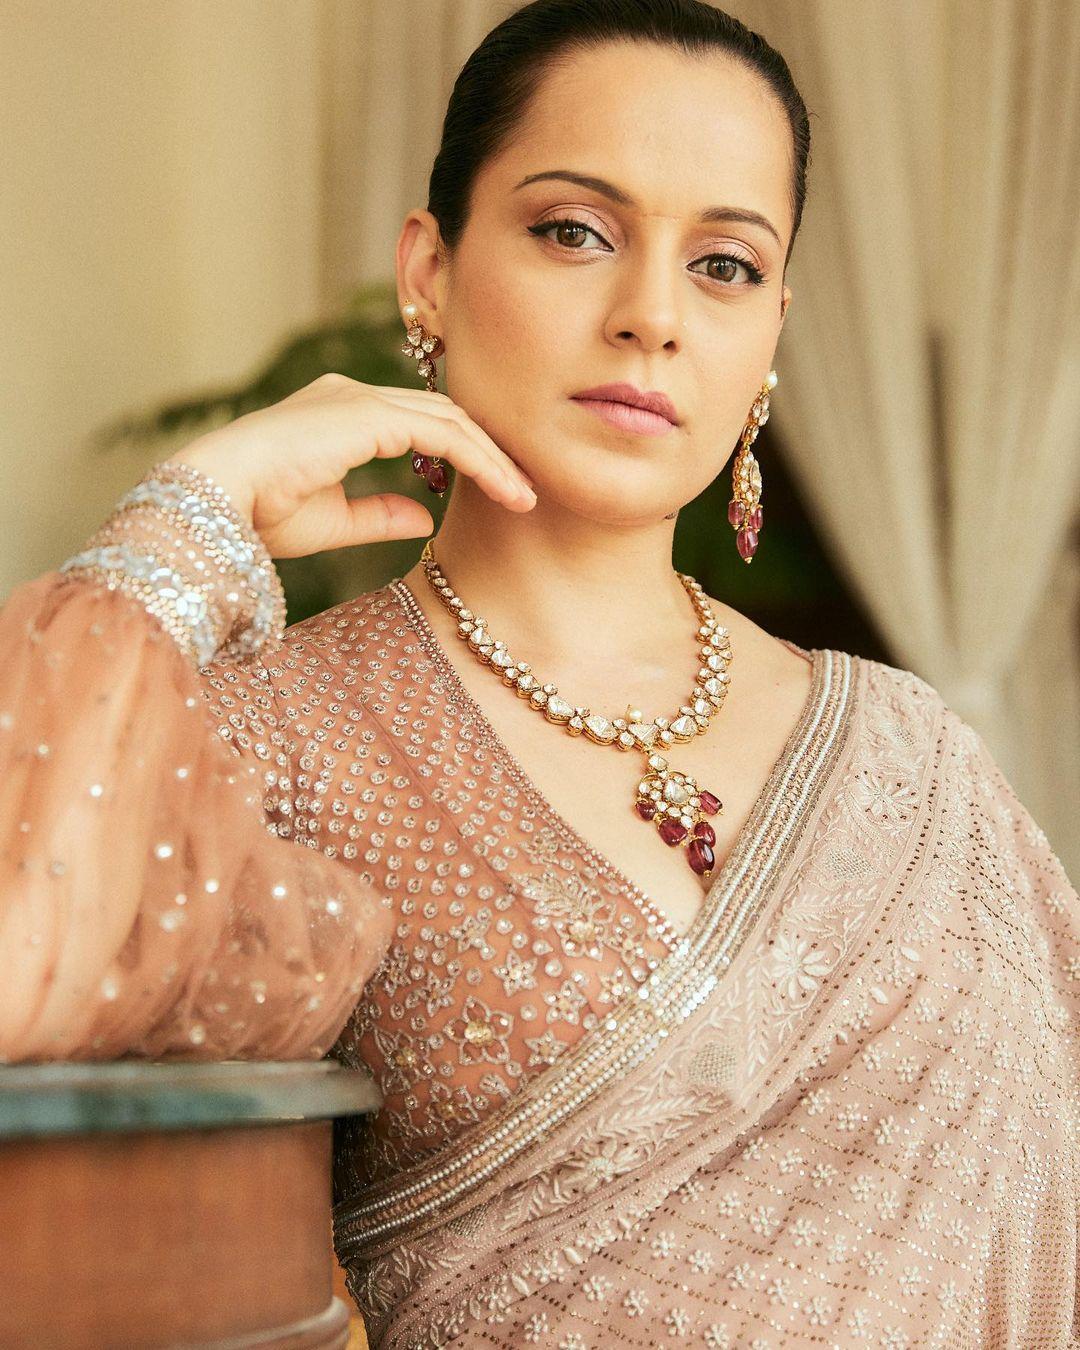 Kangana's blouse with sheer sleeves stole the spotlight. This look of the actress is perfect to ace your look on any occasion, be it a family function or a friend's wedding